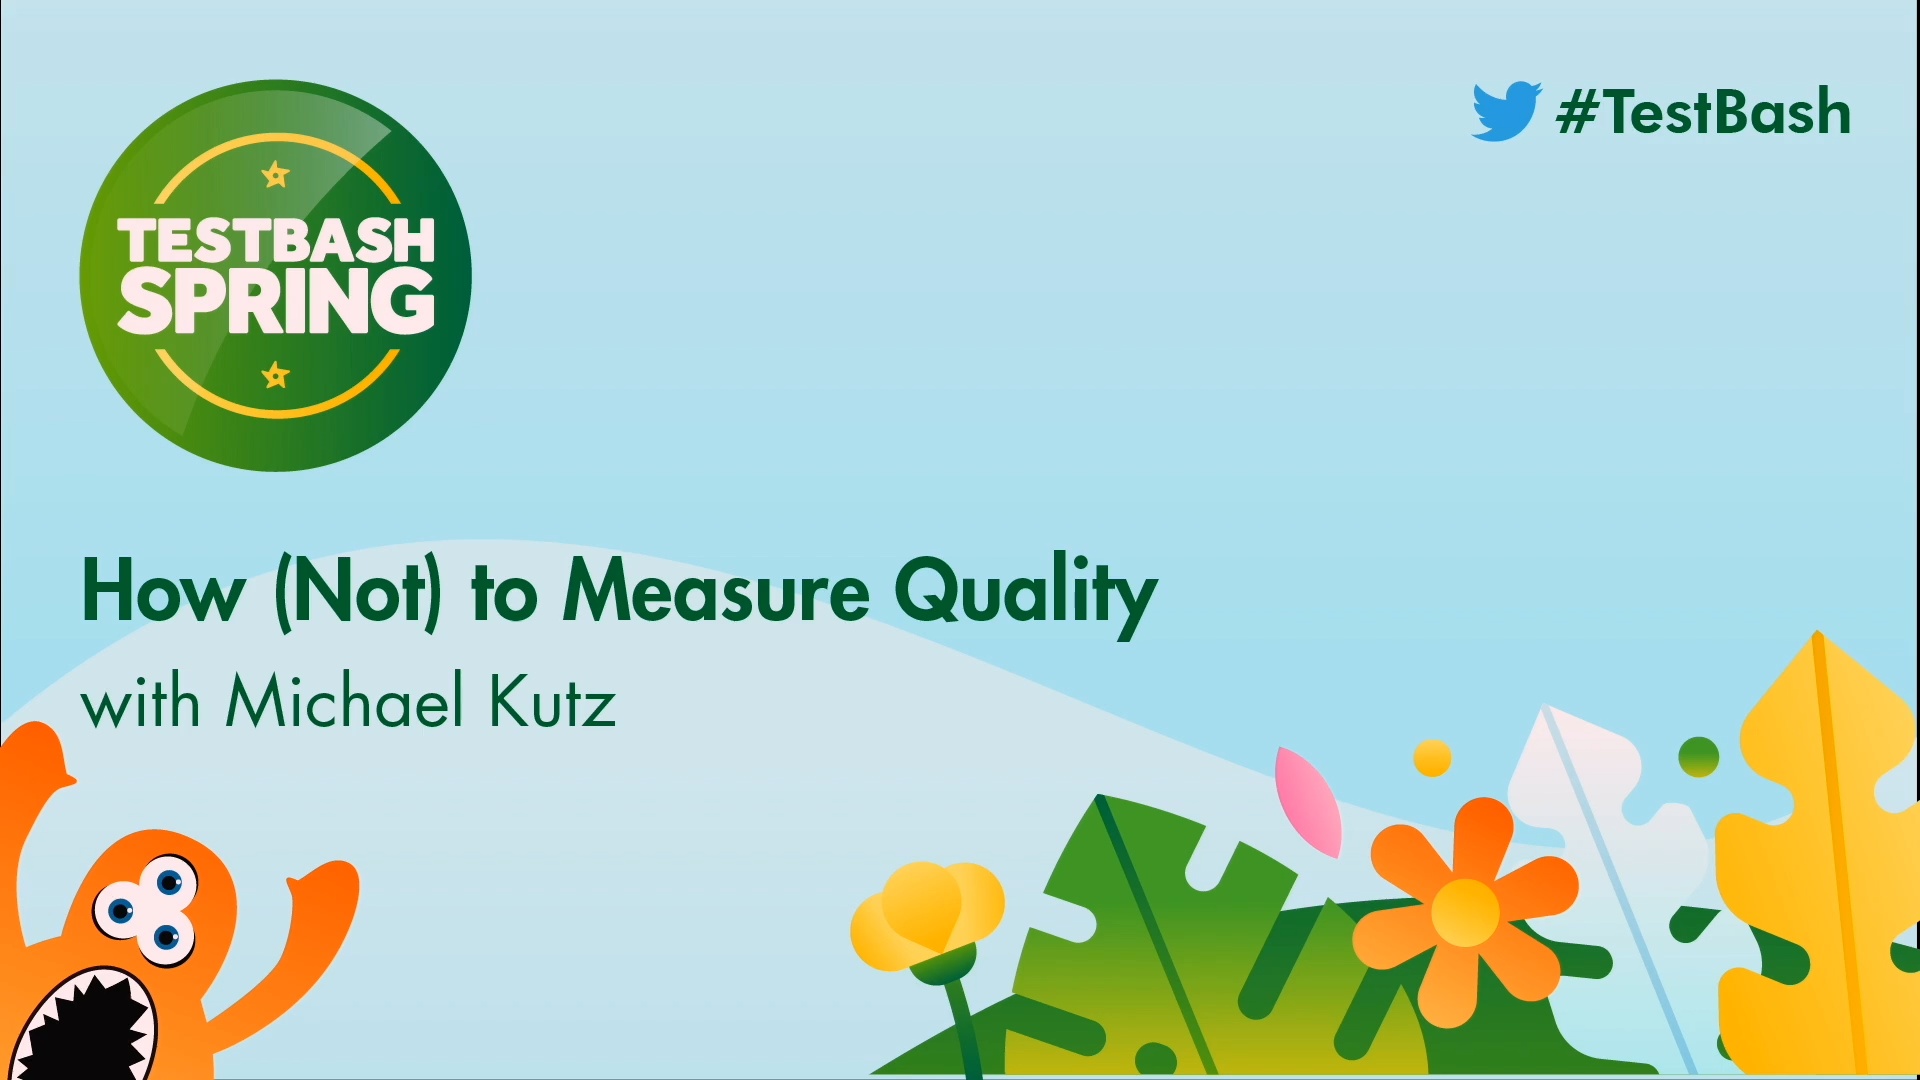 How (Not) to Measure Quality